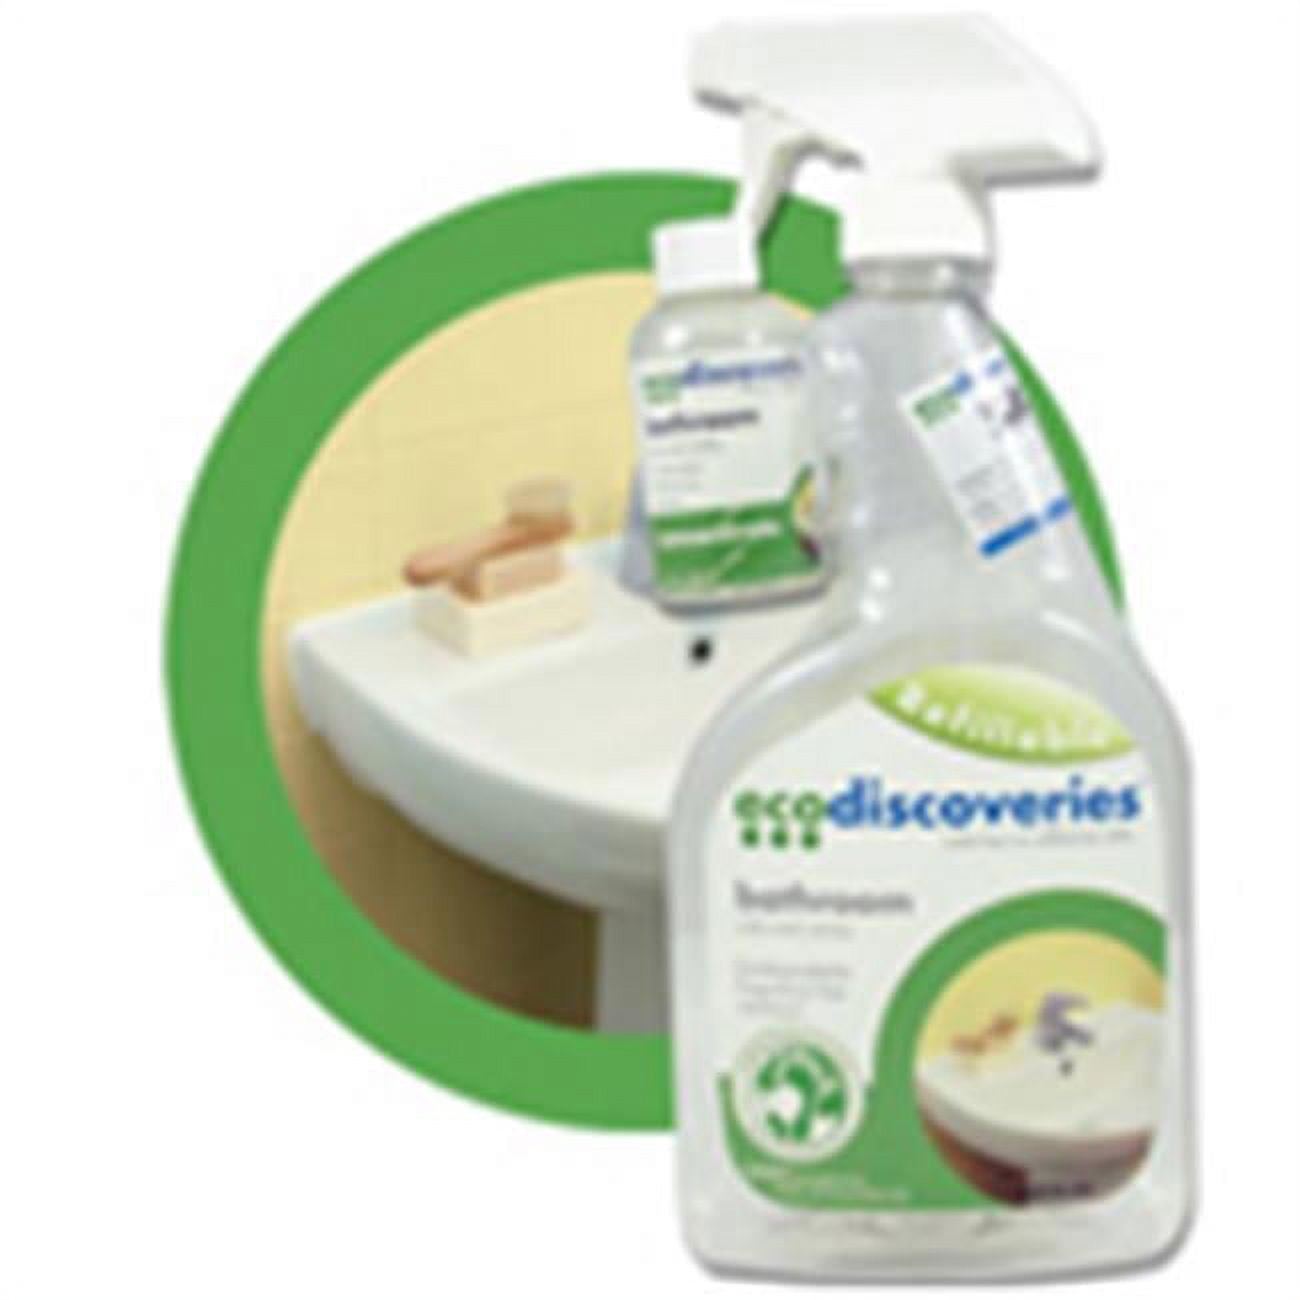 MOLDZYME, Mold Stain Cleaner – EcoDiscoveries